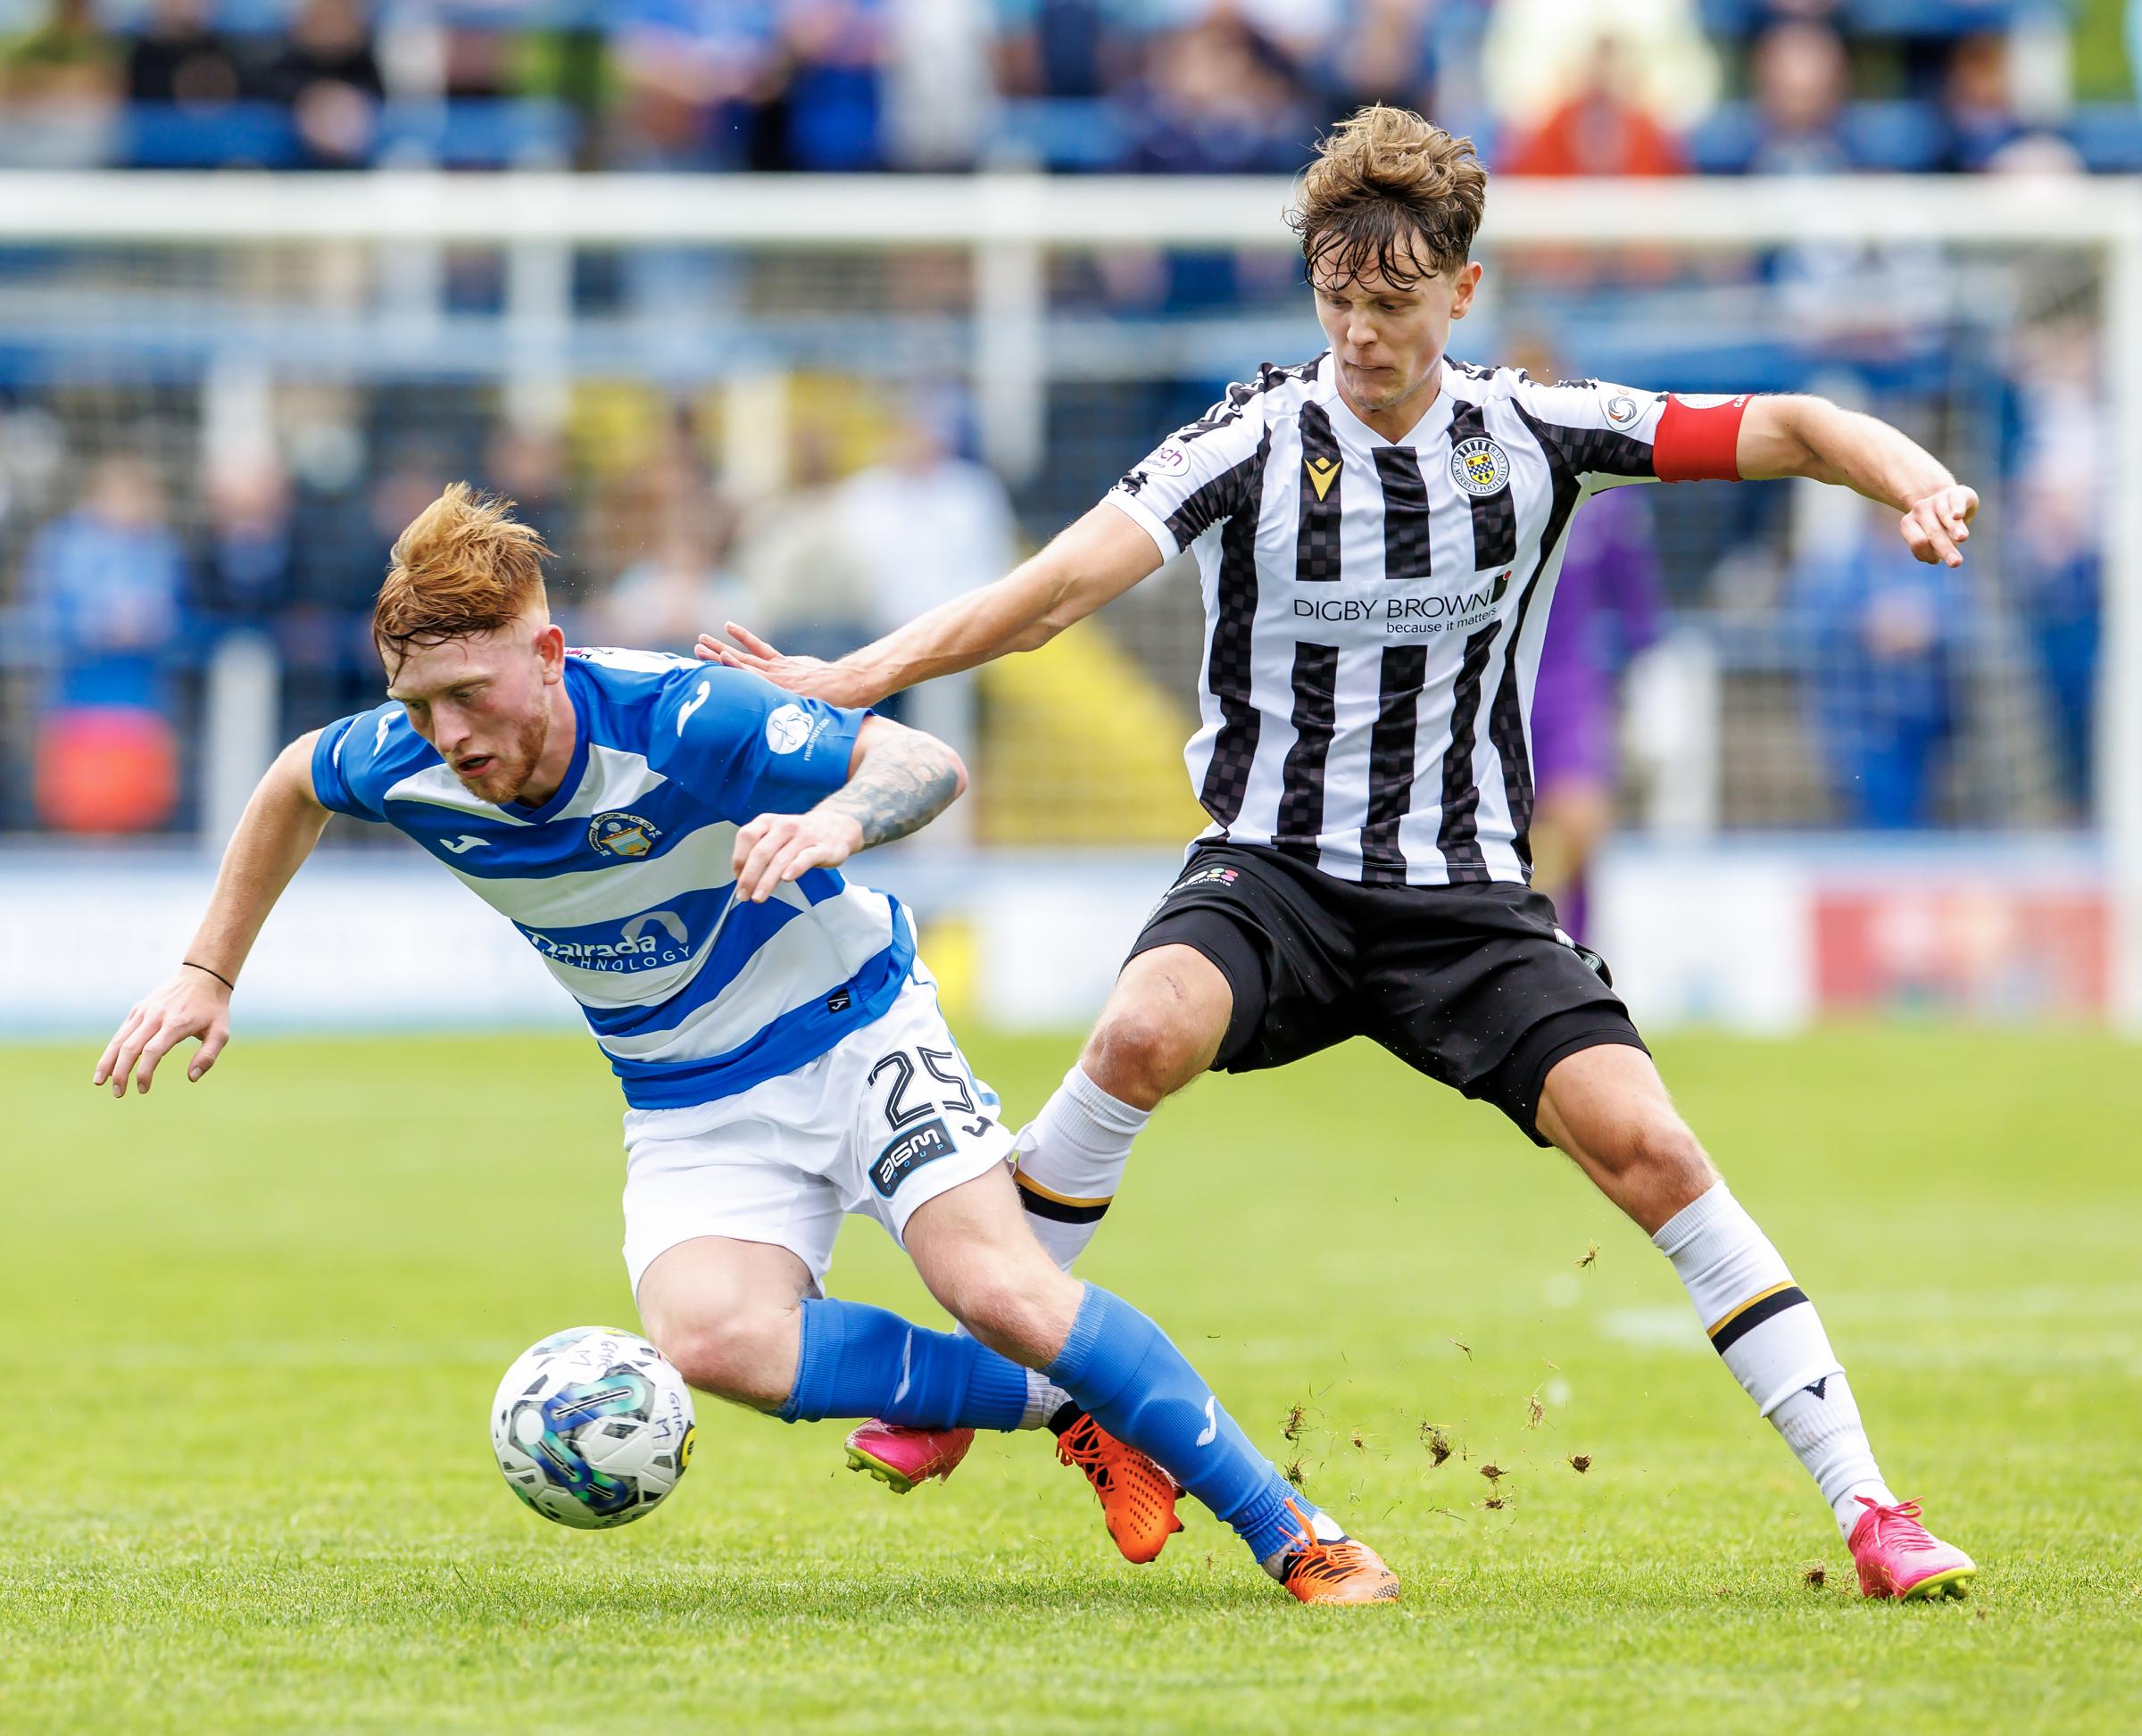 Morton fan forum: Beating St Mirren gives me bragging rights